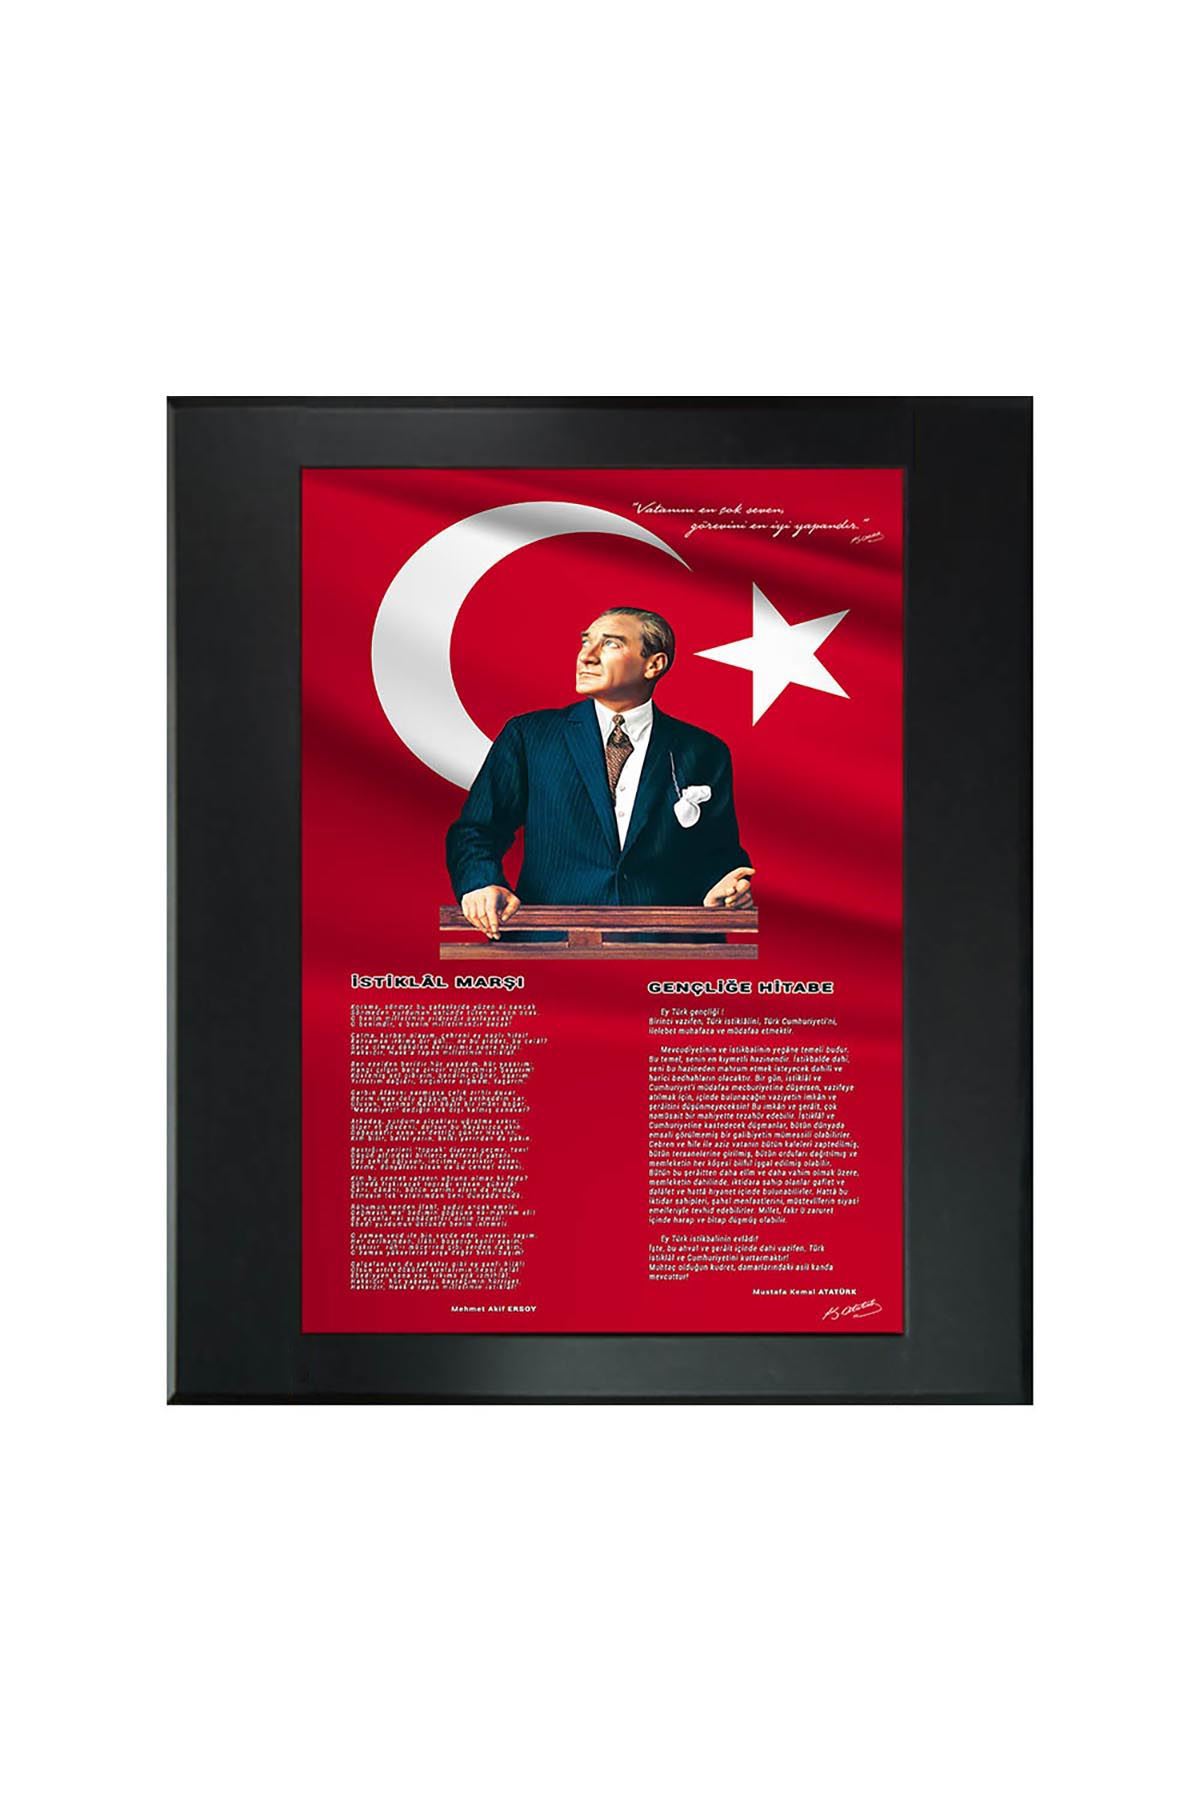 Atatürk Printed Manager Board | Printed Manager Board | Leather Framed Board | High Quality Manager Board